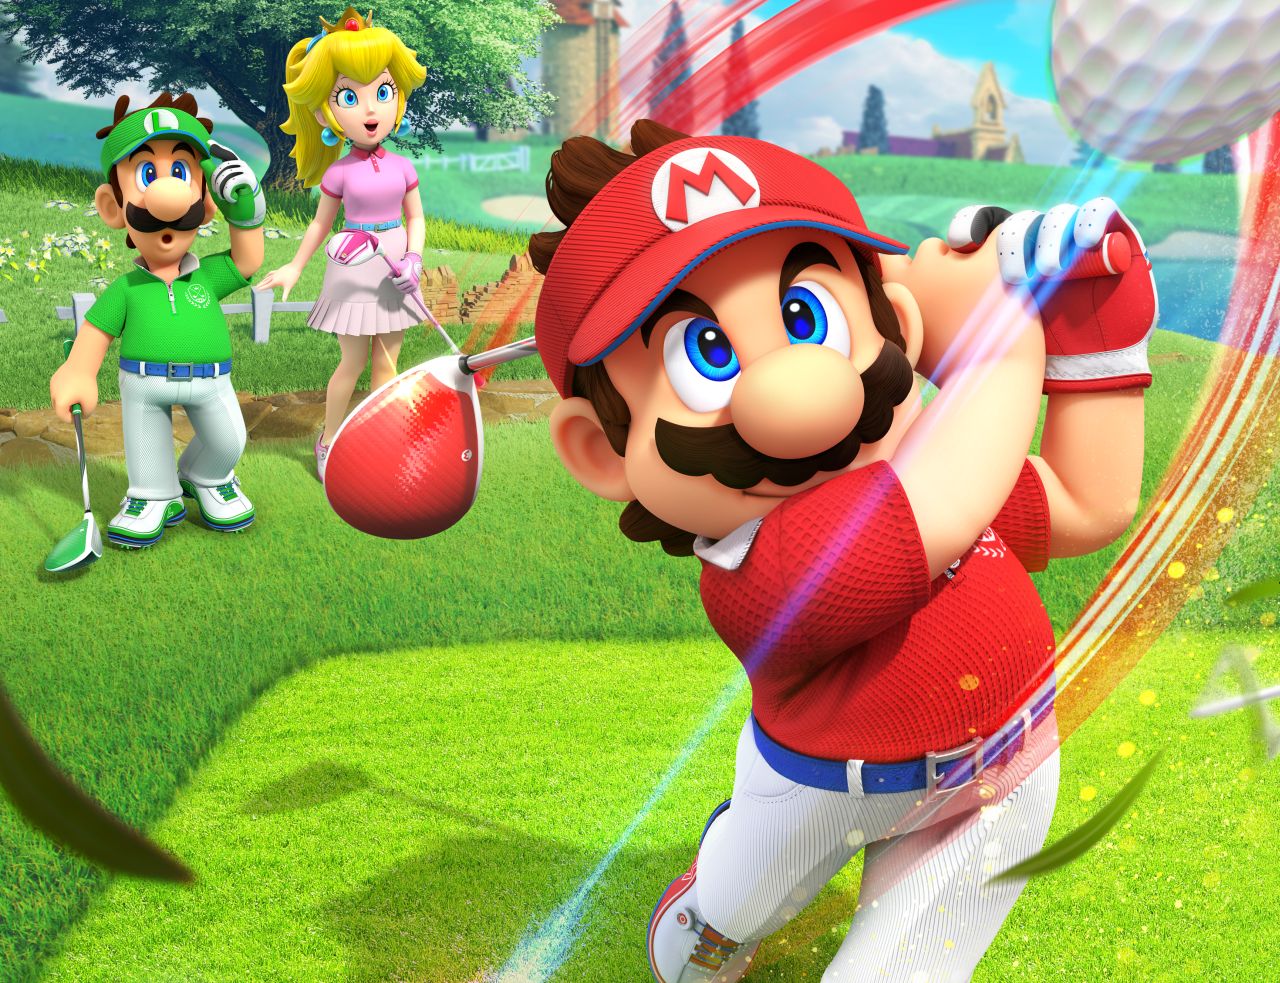 Image for Mario Golf: Super Rush free updates to include new courses and characters